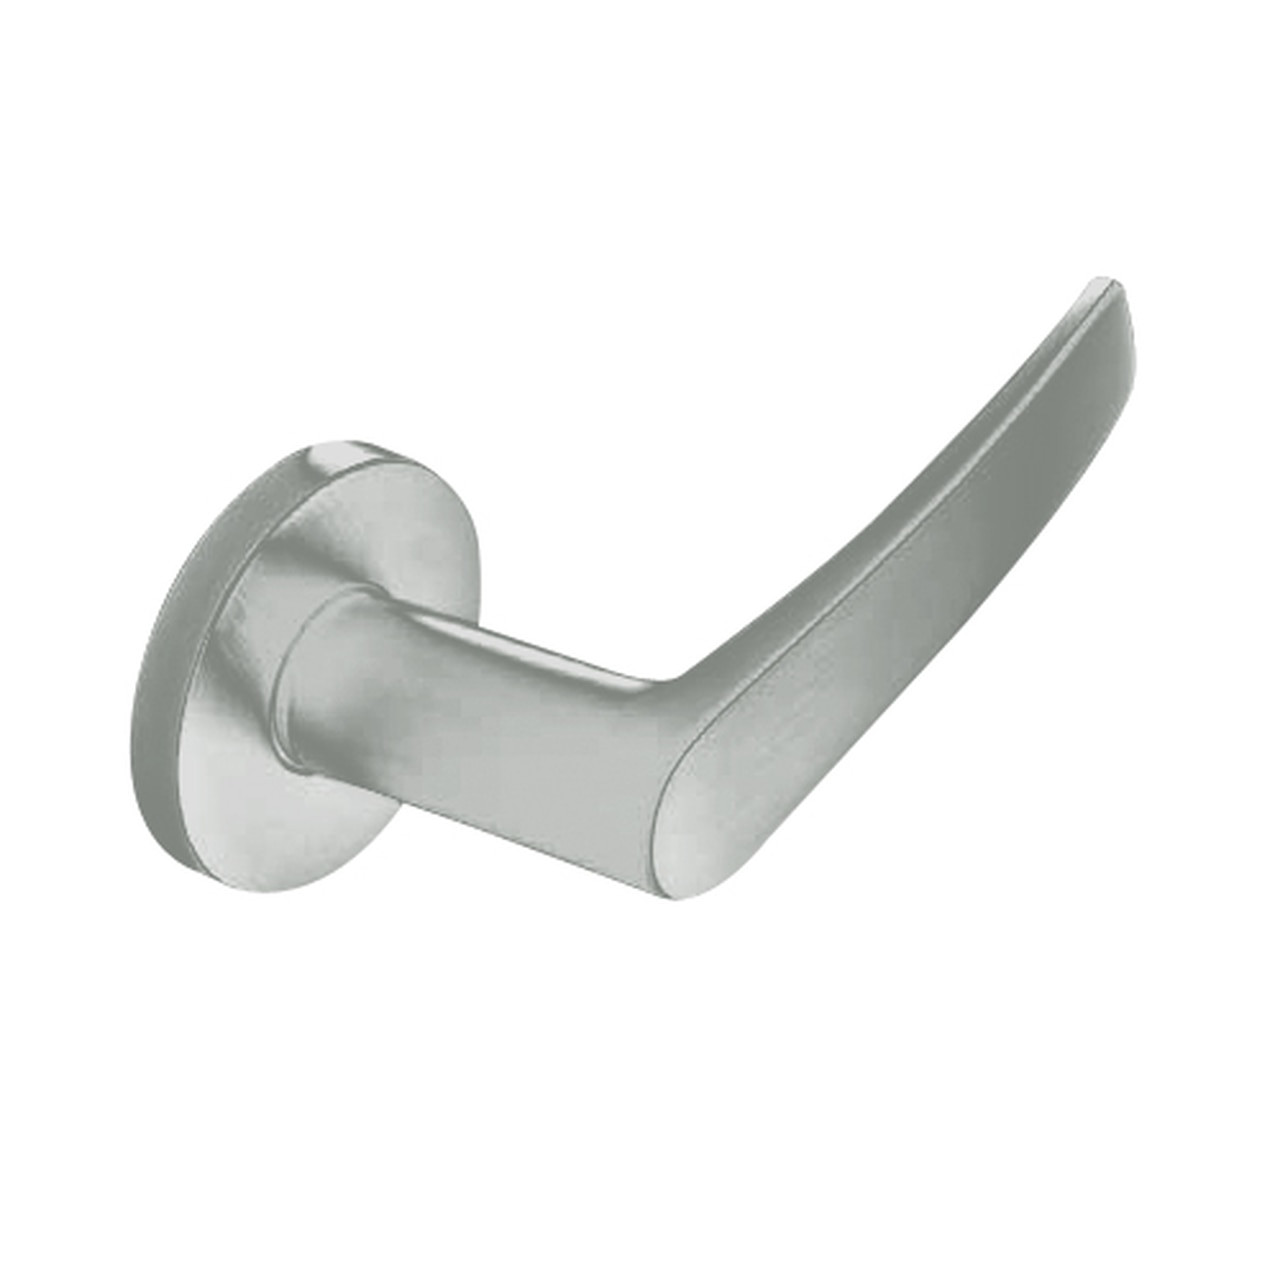 ML2069-ASA-619-M31 Corbin Russwin ML2000 Series Mortise Institution Privacy Trim Pack with Armstrong Lever in Satin Nickel